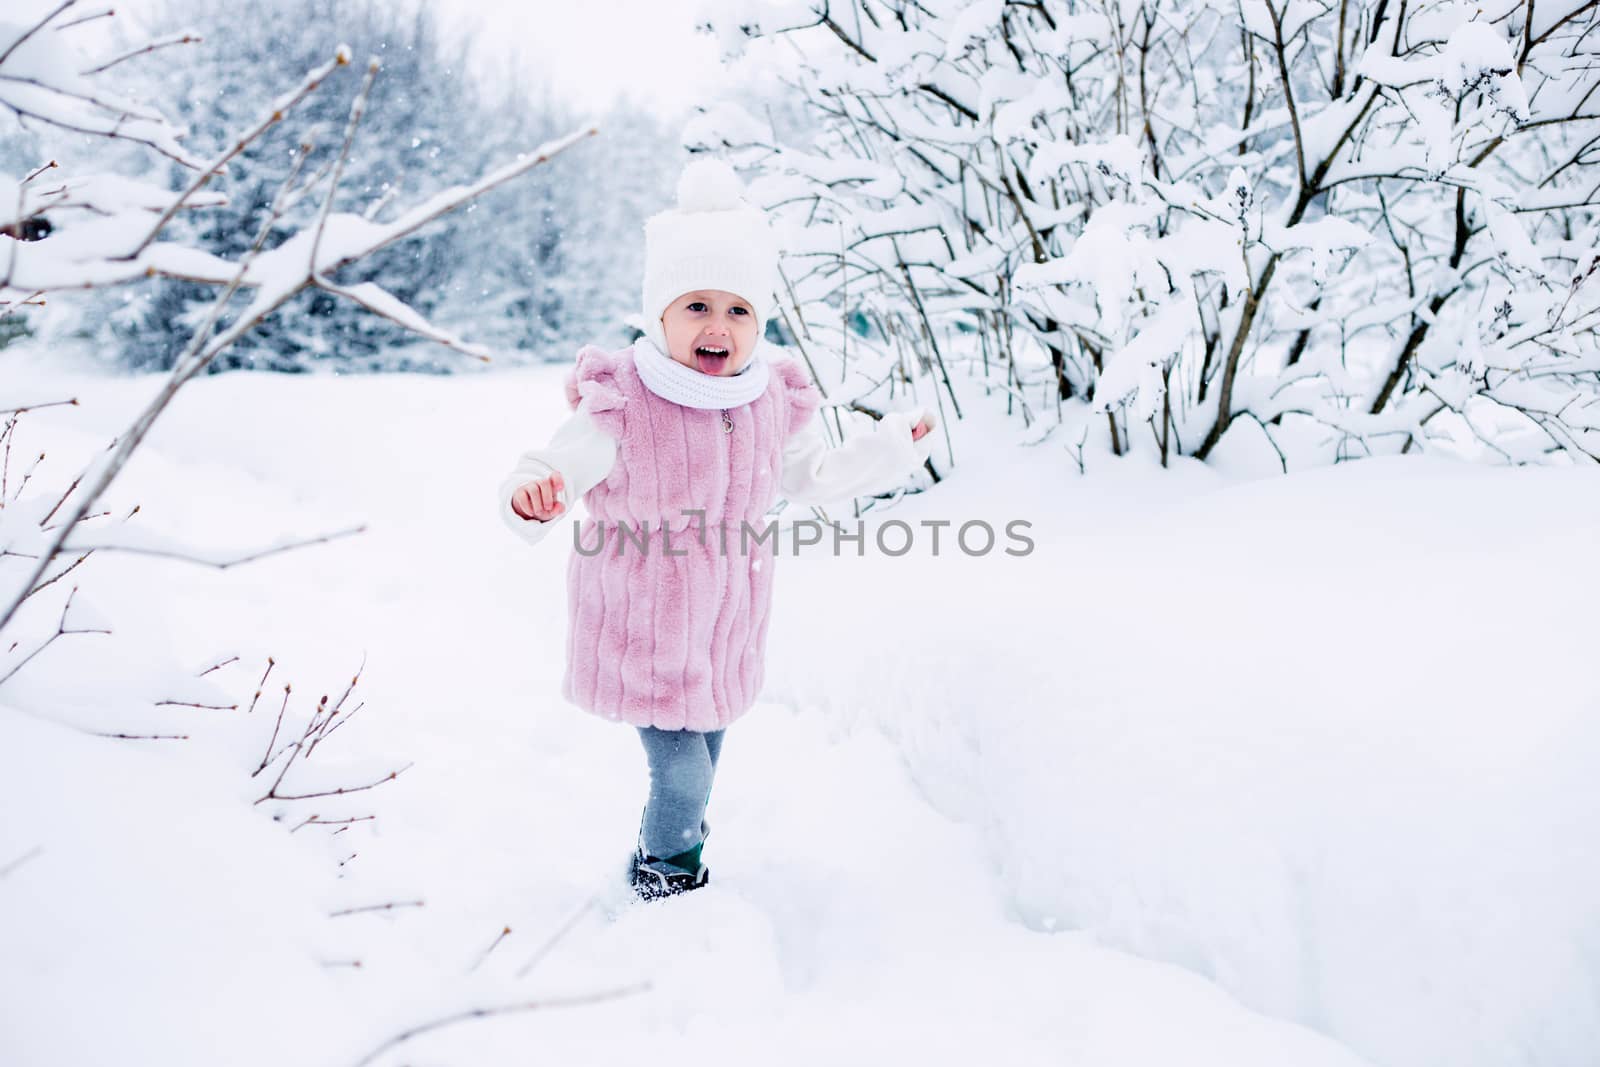 .A little girl in a pink fur coat stands in the middle of a snow-covered park on a cloudy winter day